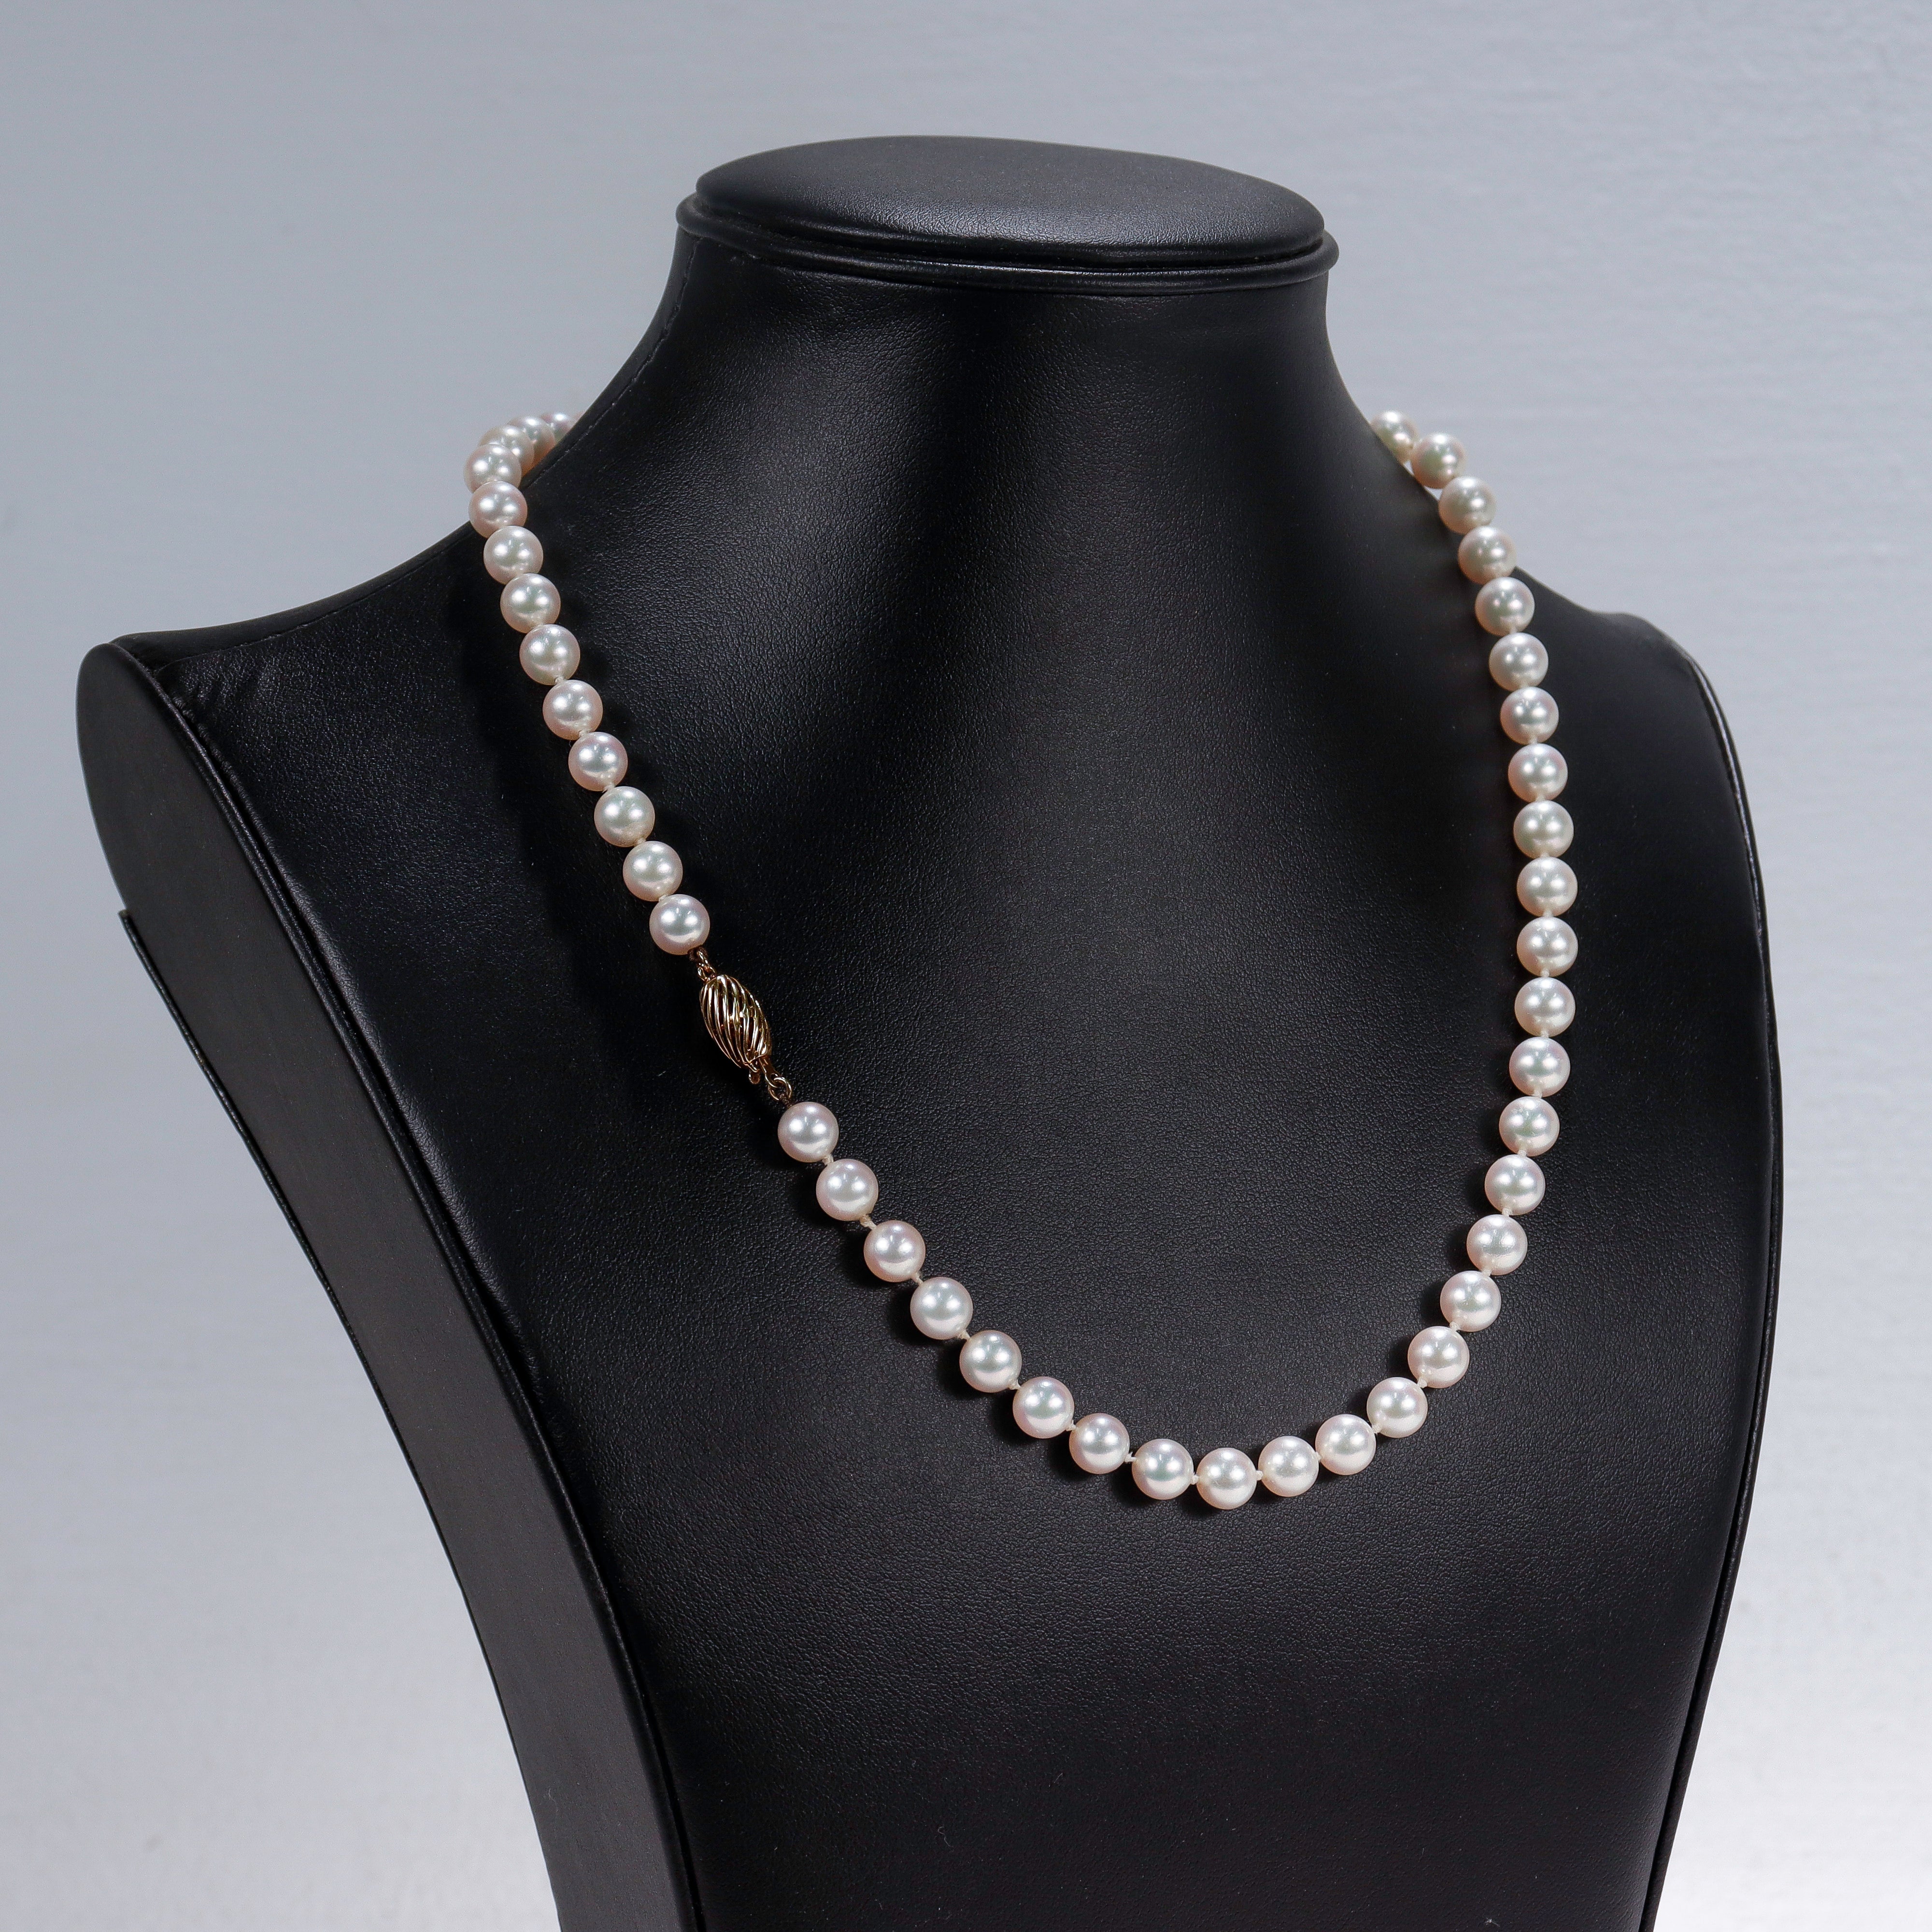 A fine vintage cultured pearl necklace.

With 7-7.5 mm round white pearls with fine color and lustre. 

Set with a 14k gold clasp. 

Originally retailed by Shapur Mozafarian of San Francisco. Together with its original receipt.

Simply a wonderful